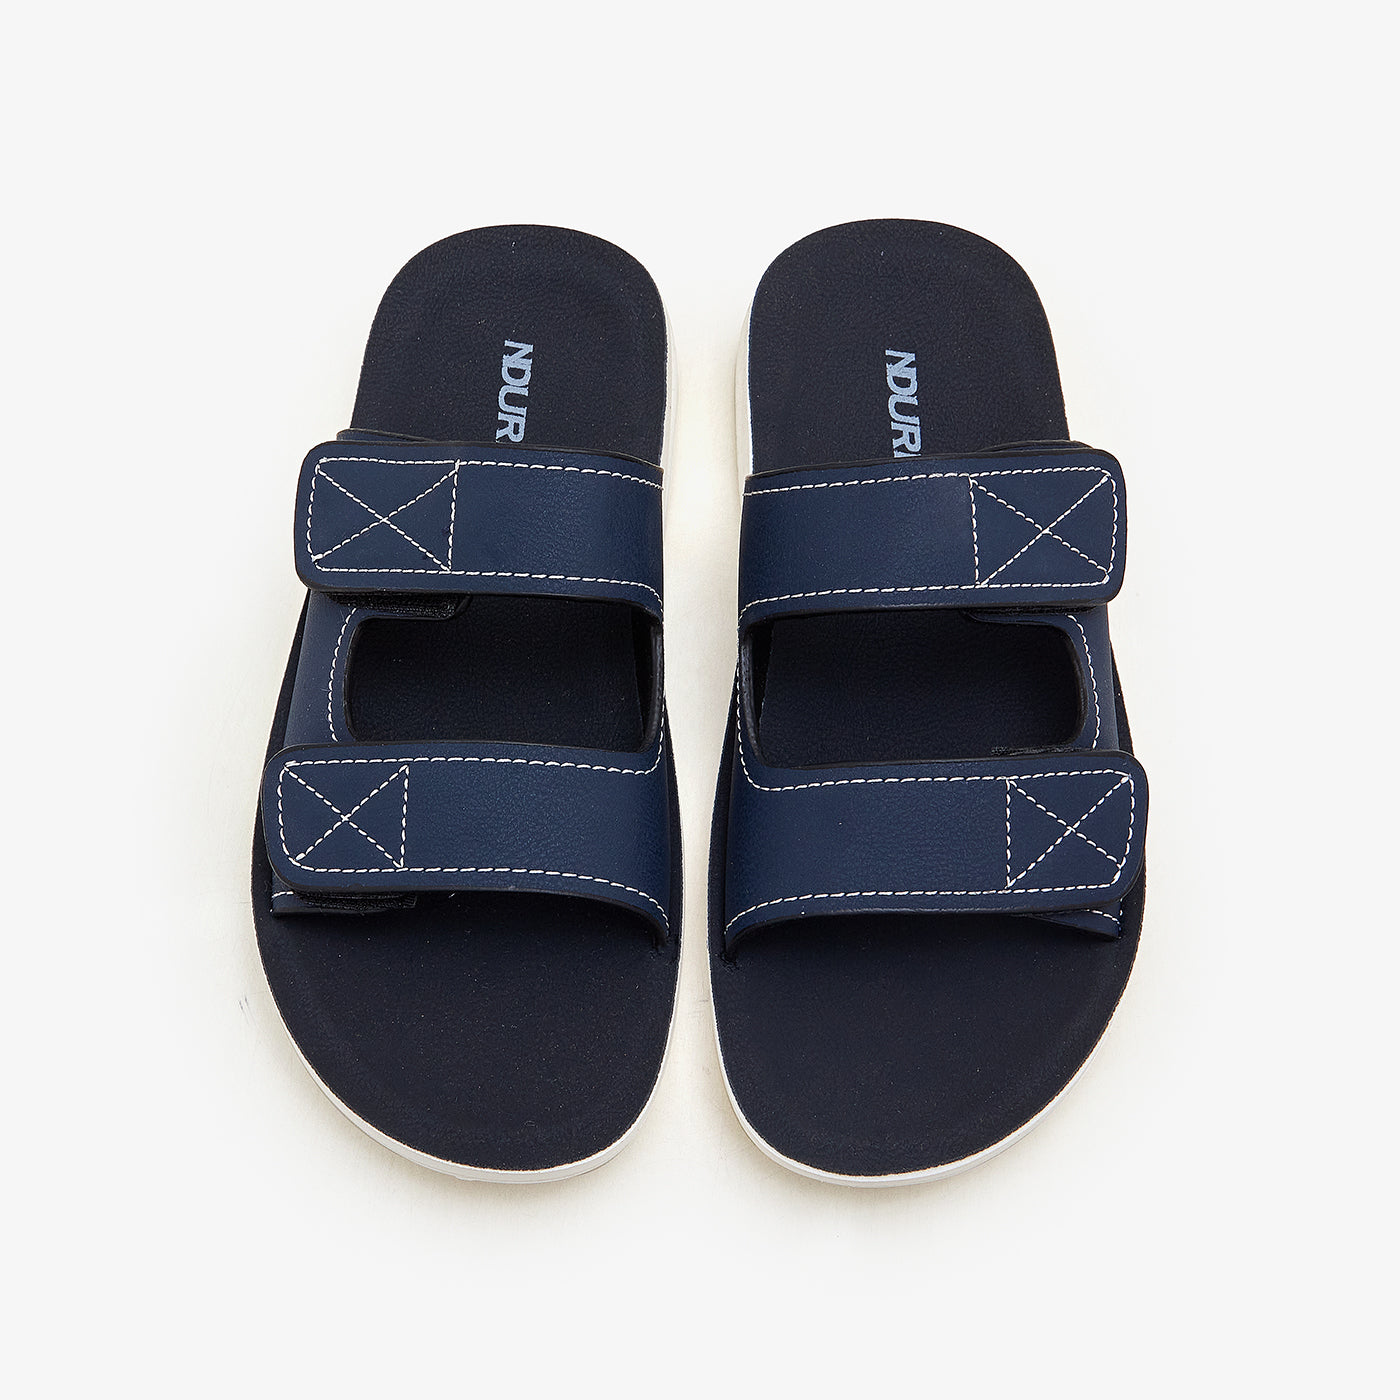 Boys' Soft Sole Slippers